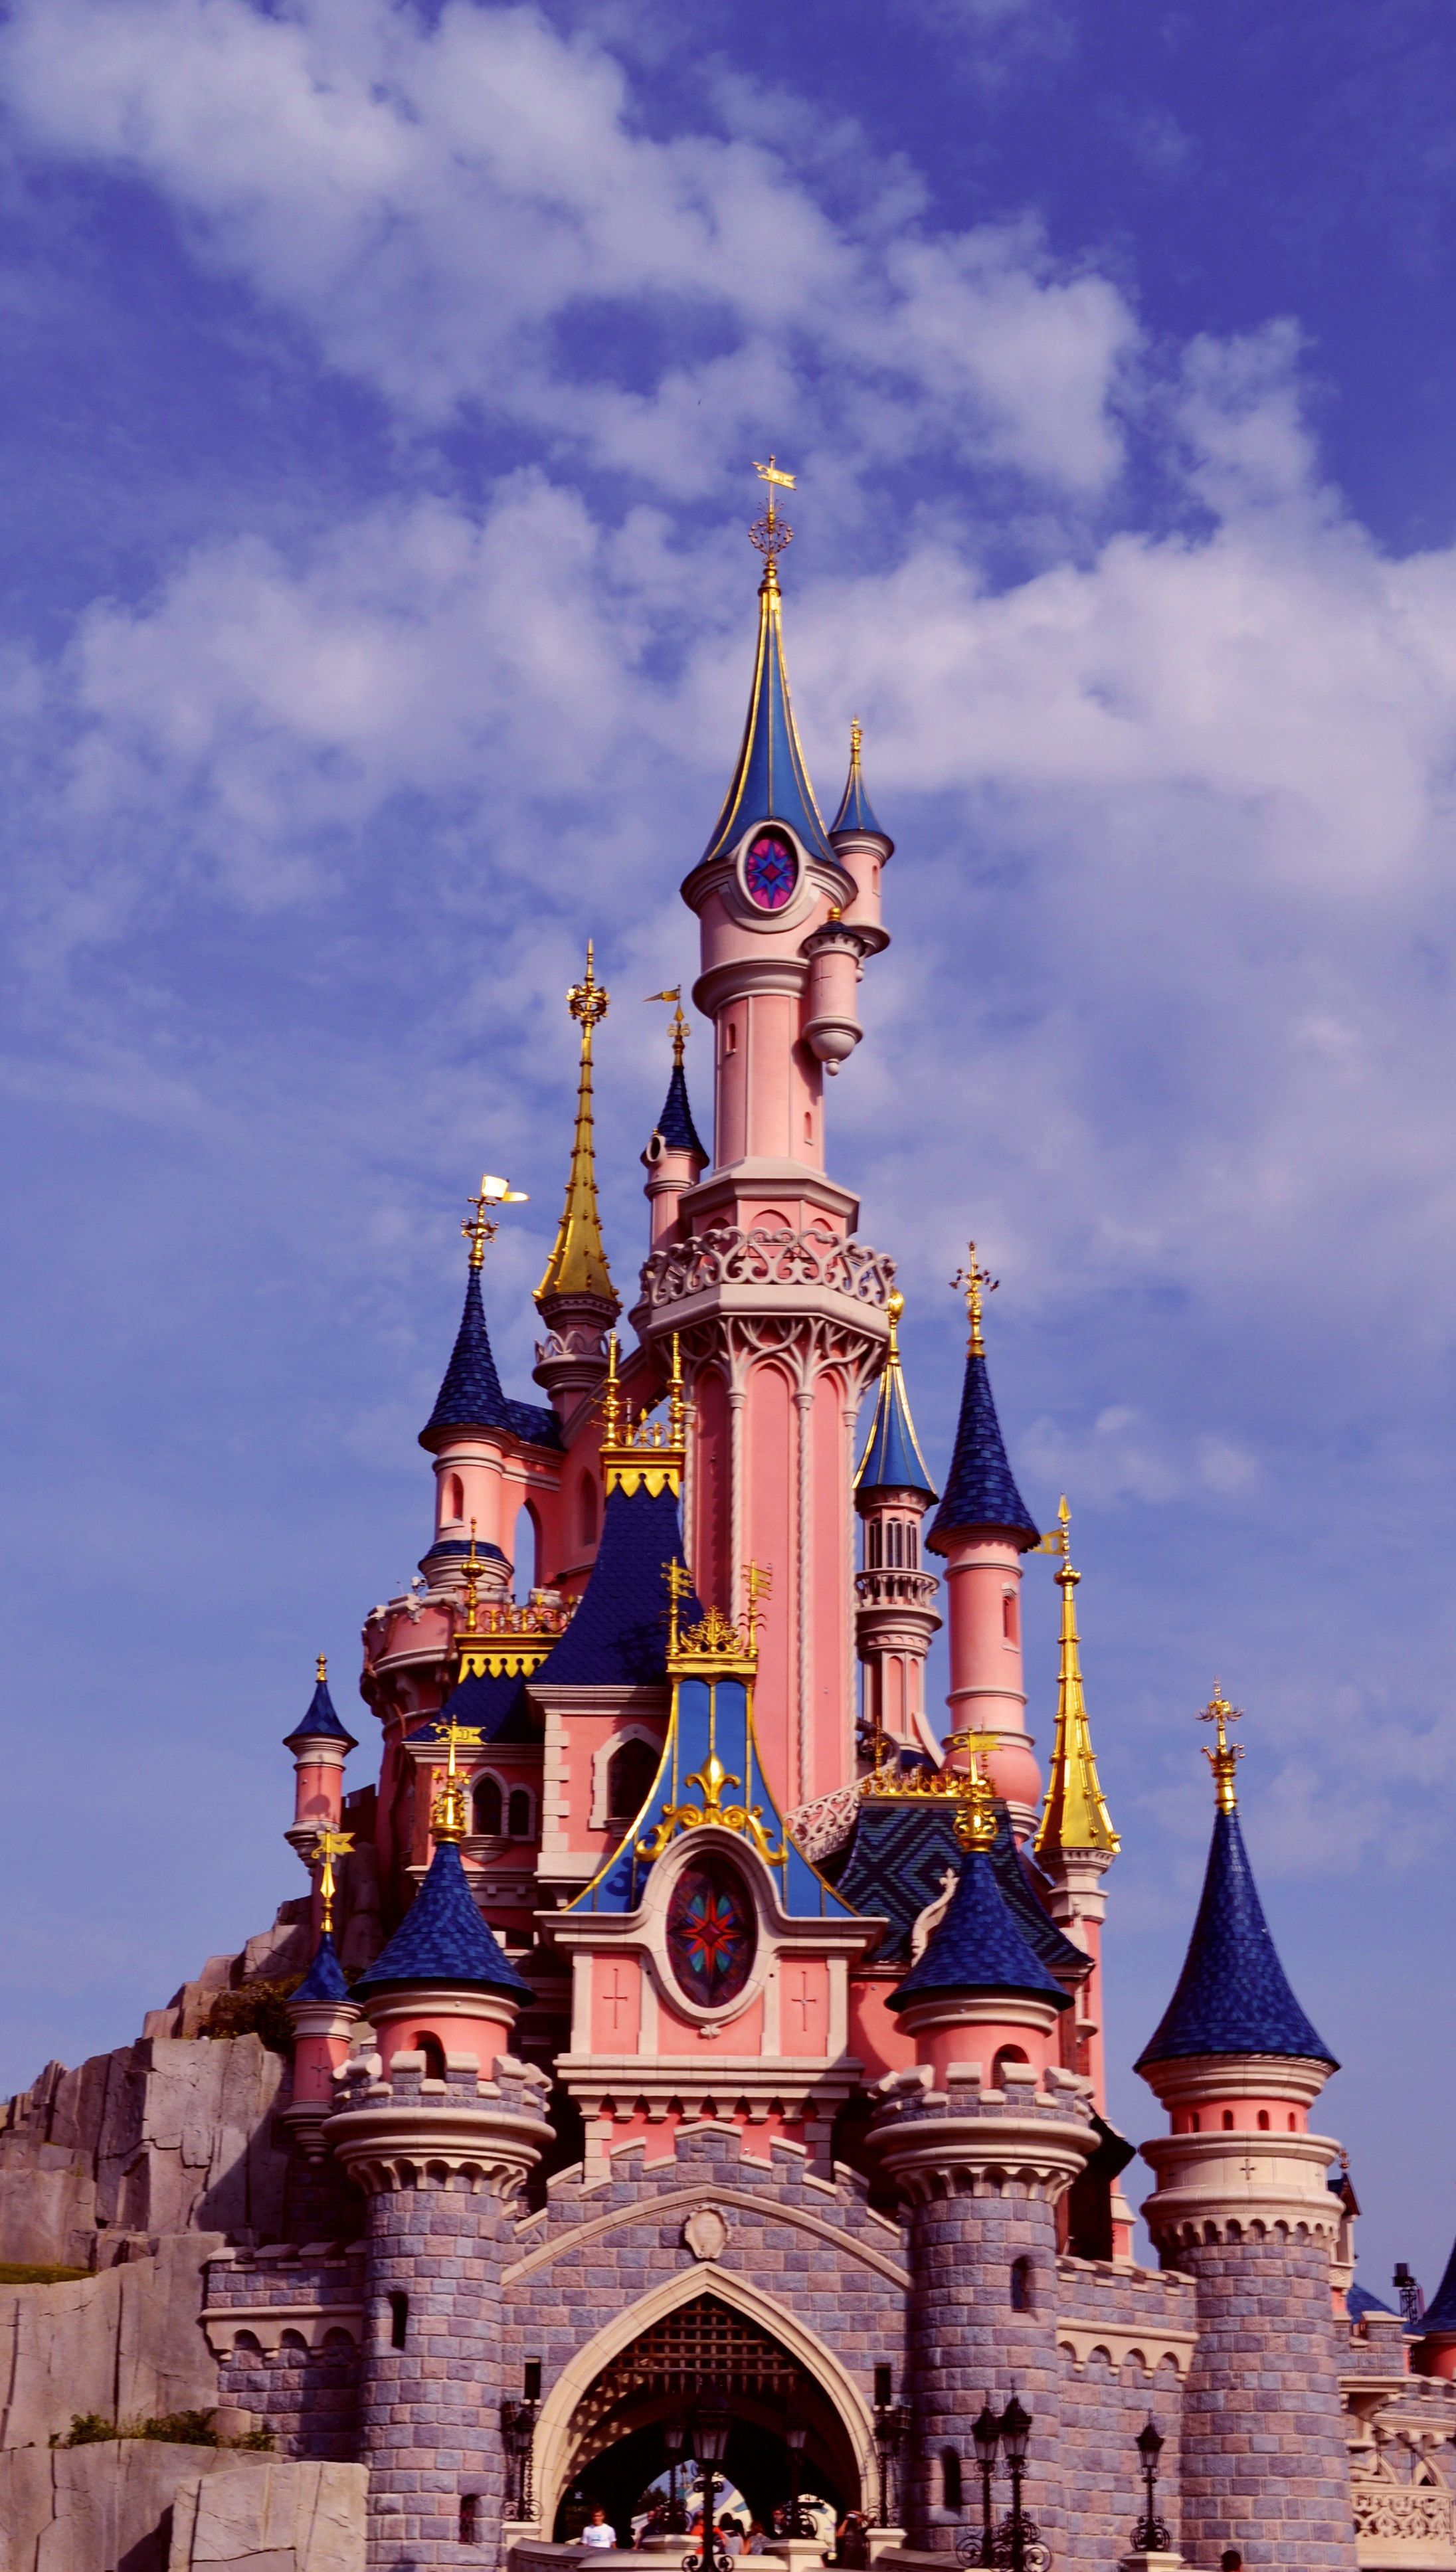 The castle is pink and blue with a large tower - Disneyland